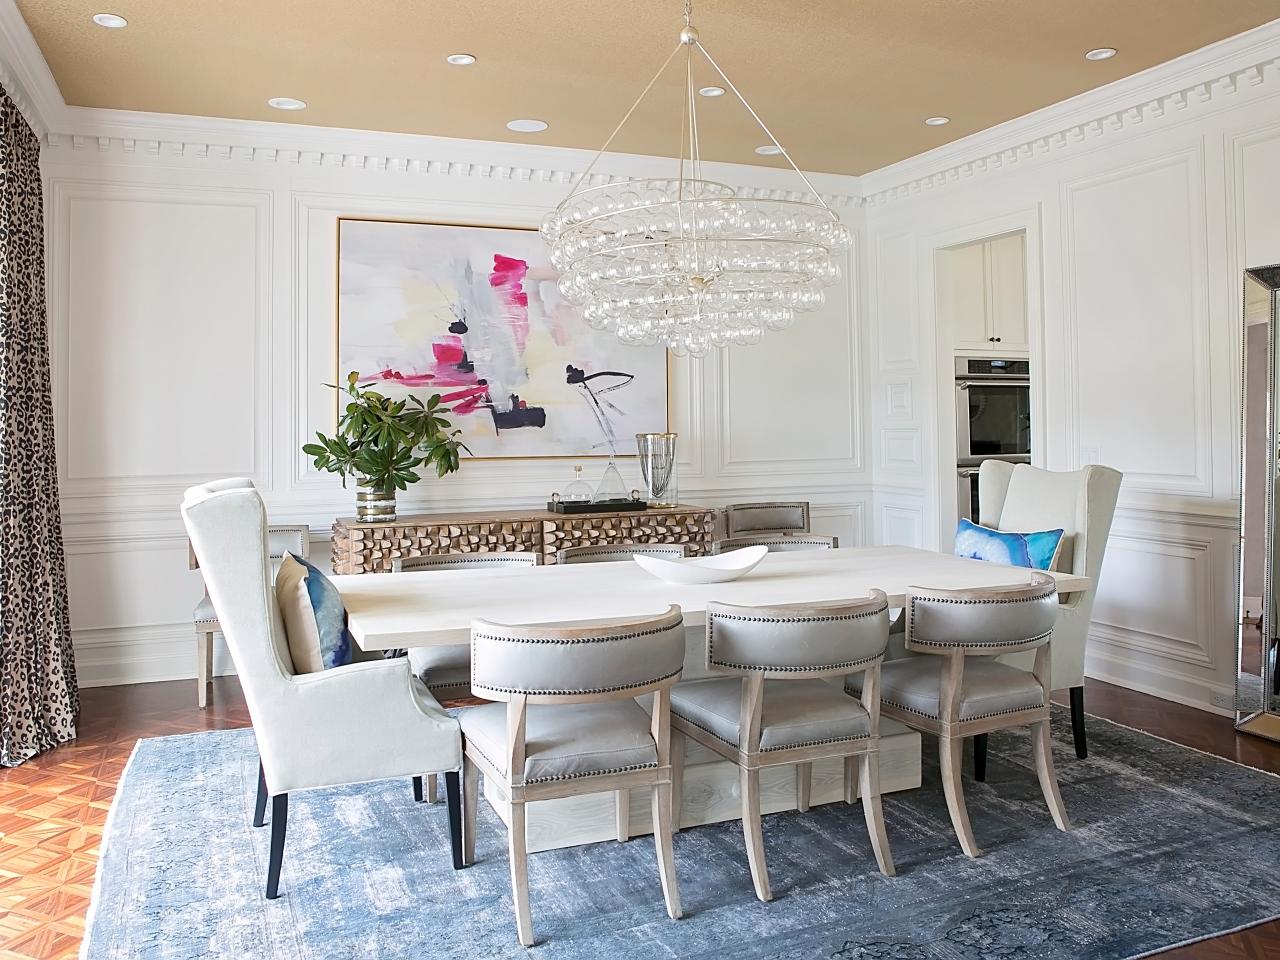 How High Above A Dining Room Table Should A Chandelier Be